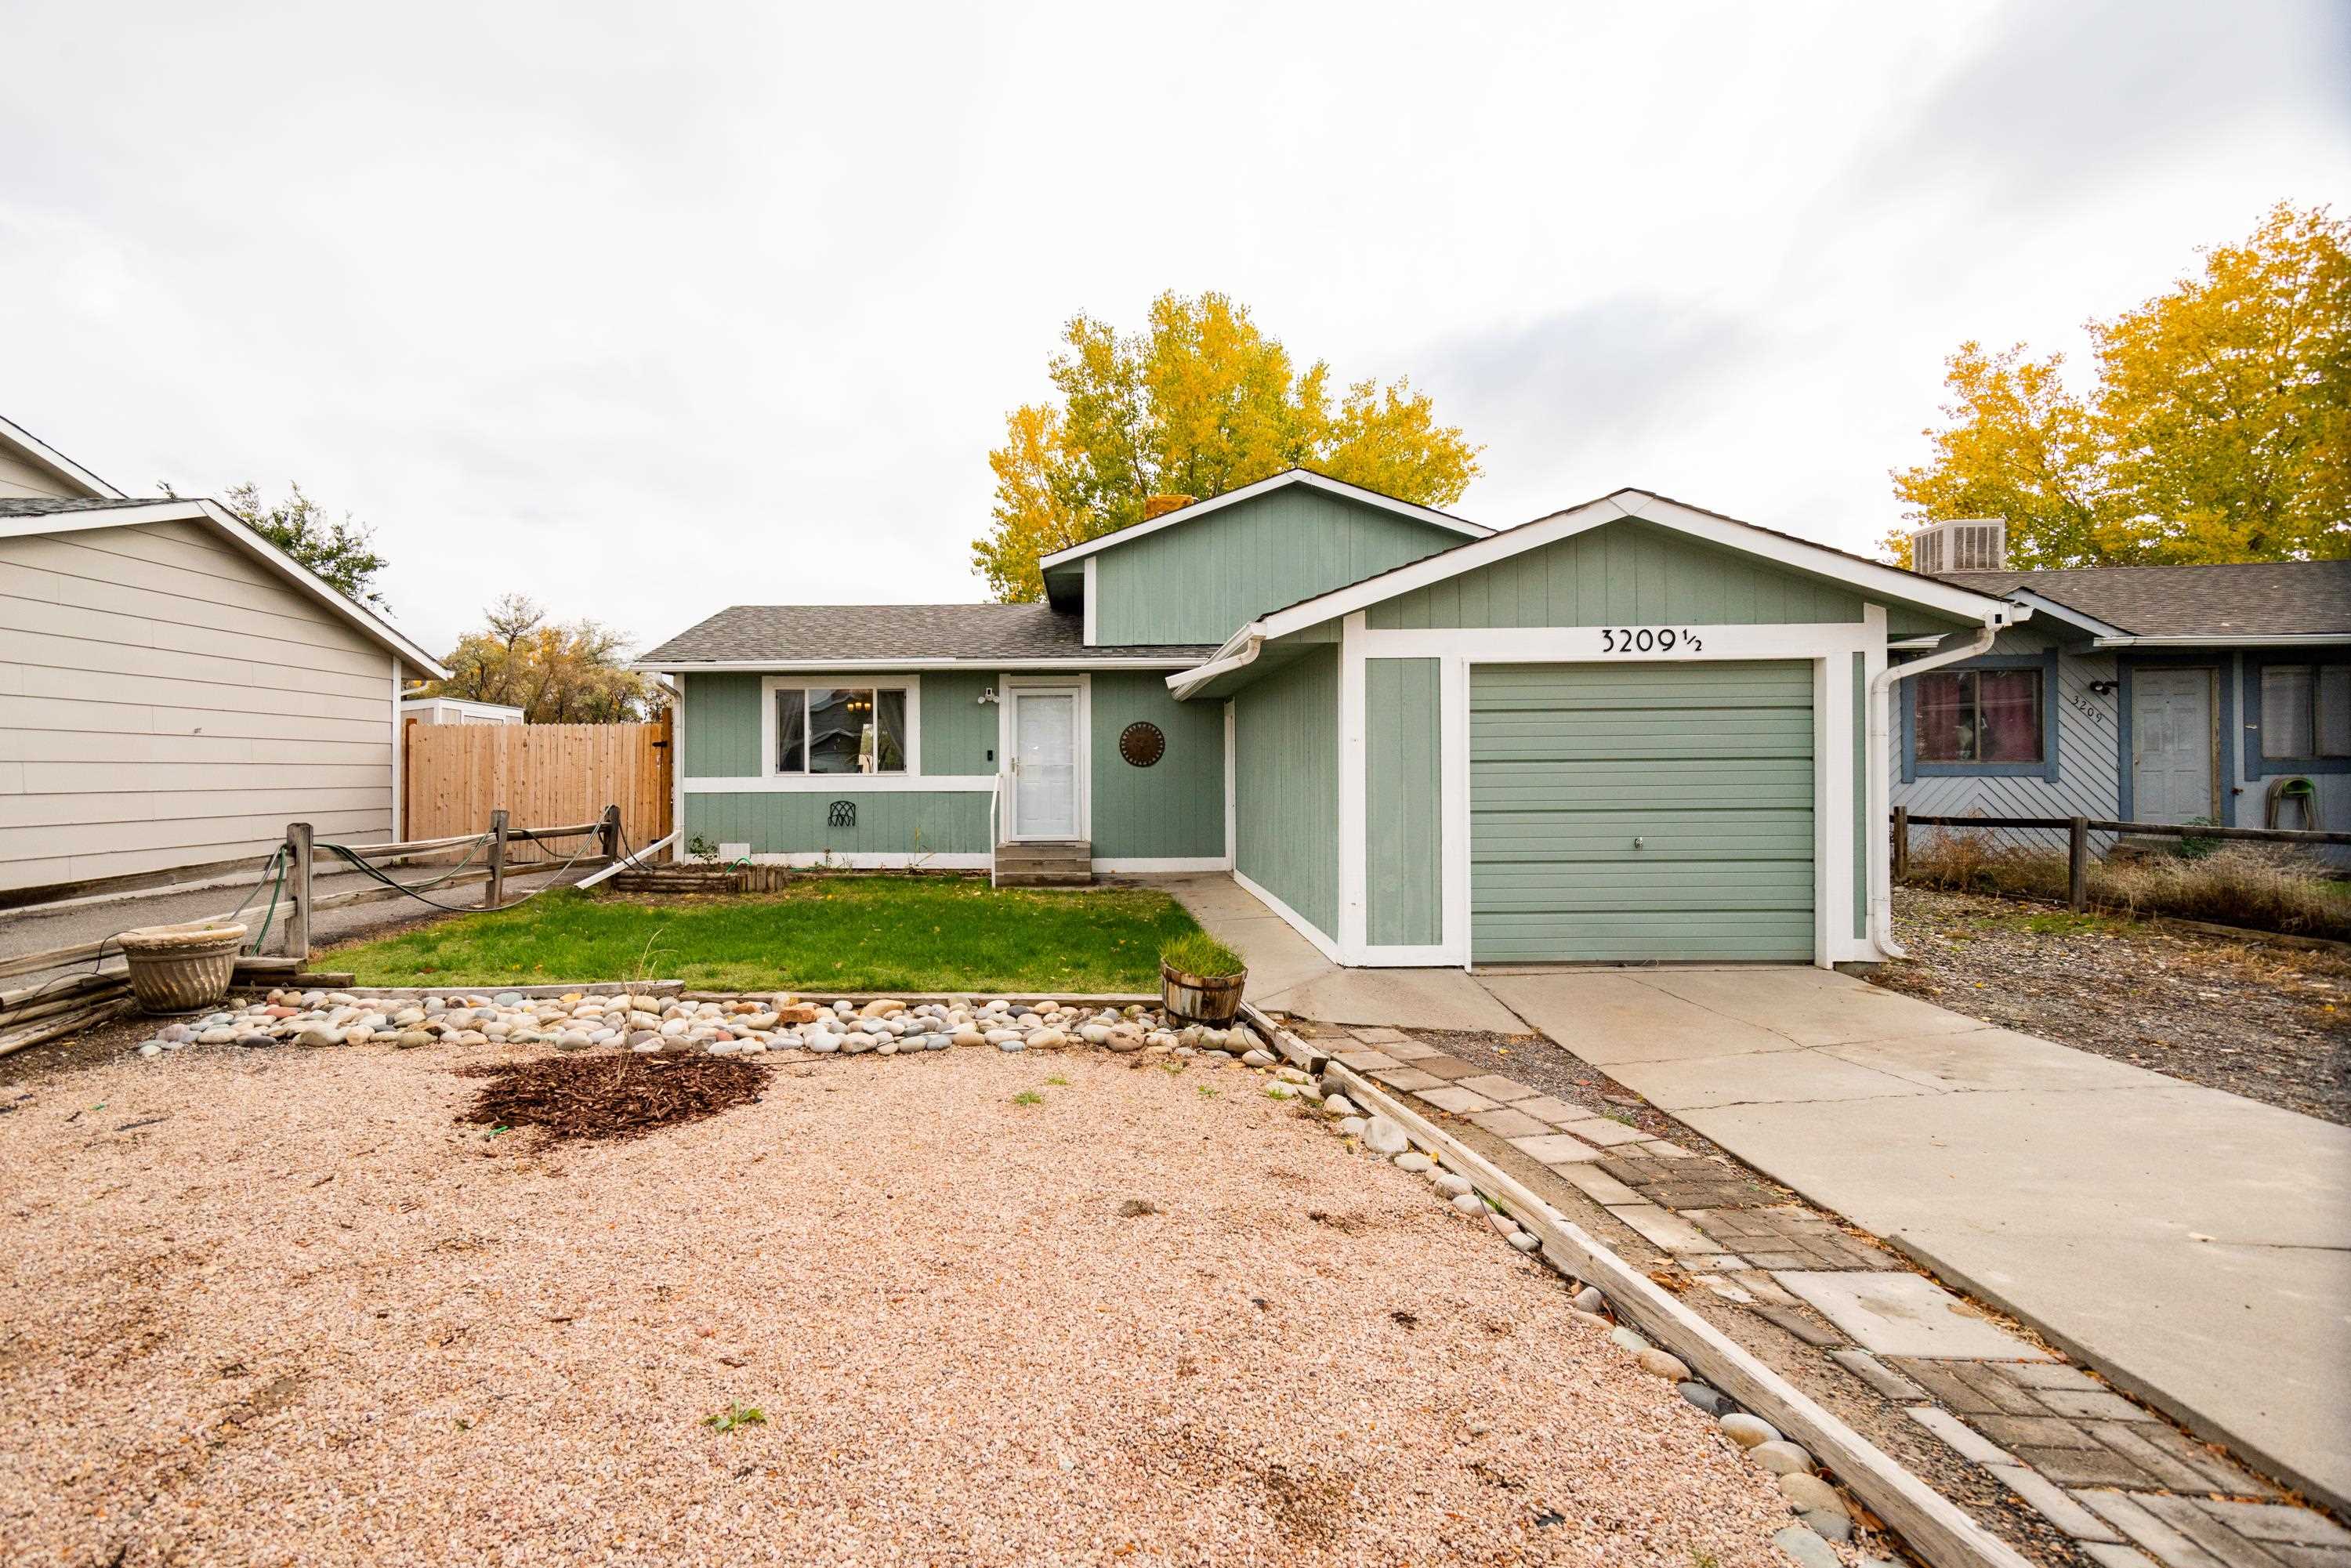 3209 1/2 Bunting Avenue, Clifton, CO 81520